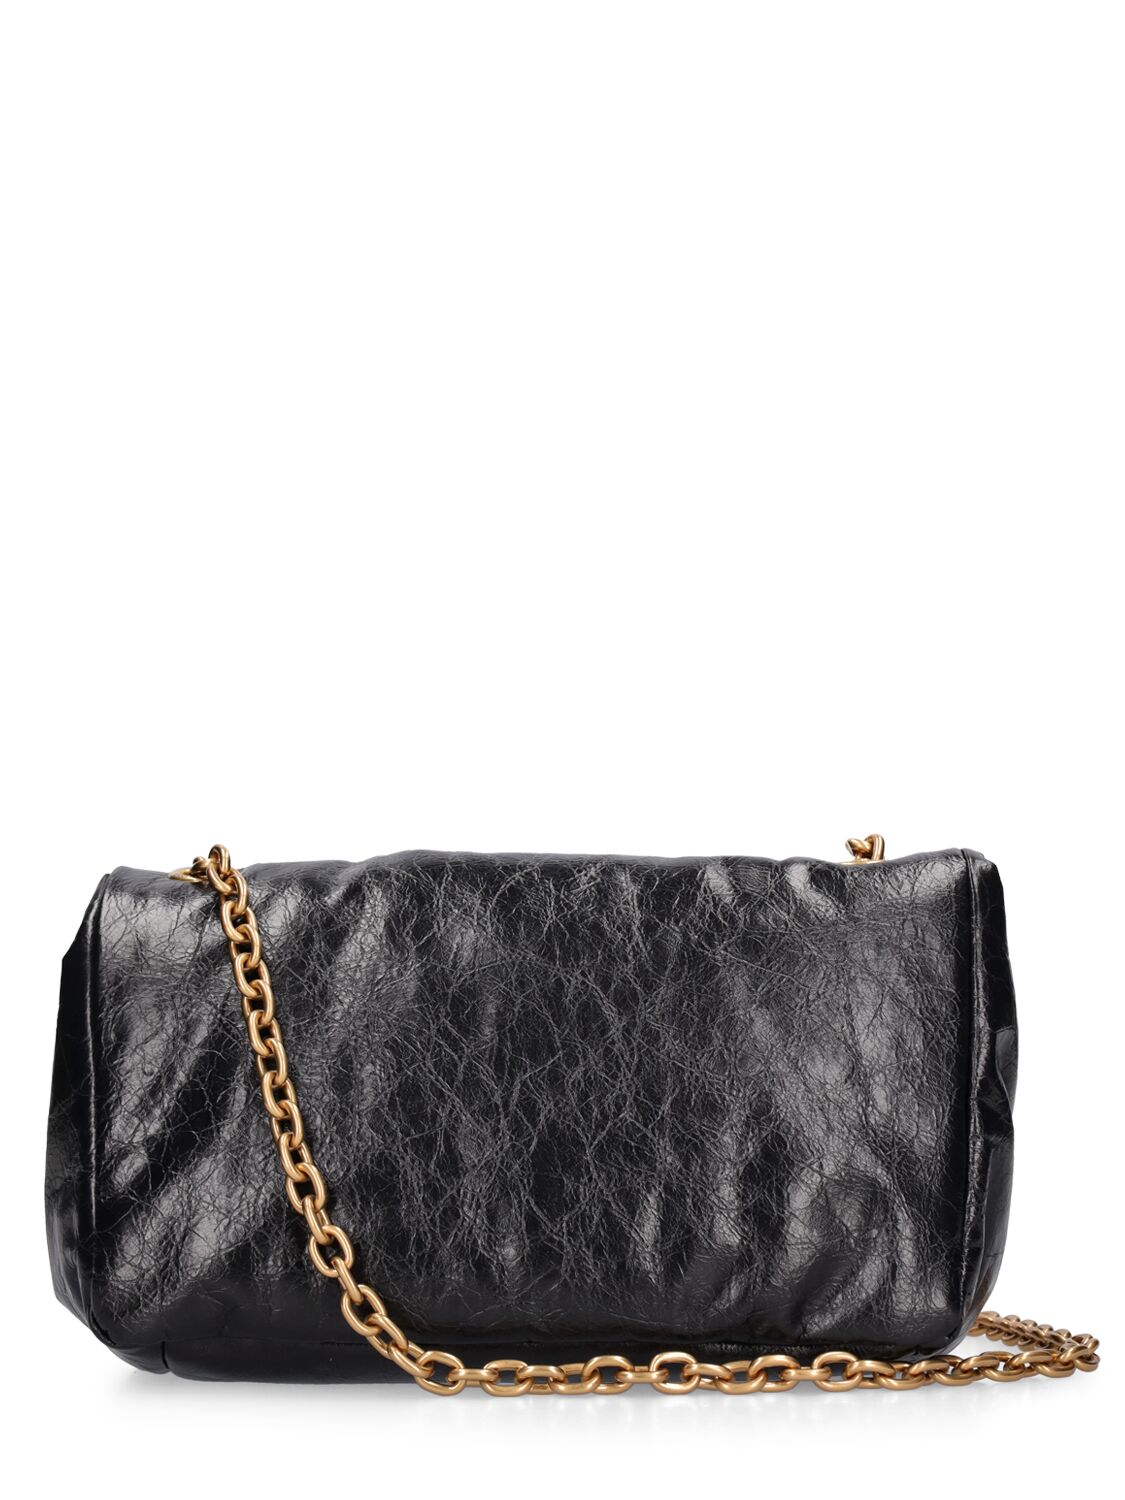 Classic Style Genuine Leather Clutch Bag Elegant Quilted 